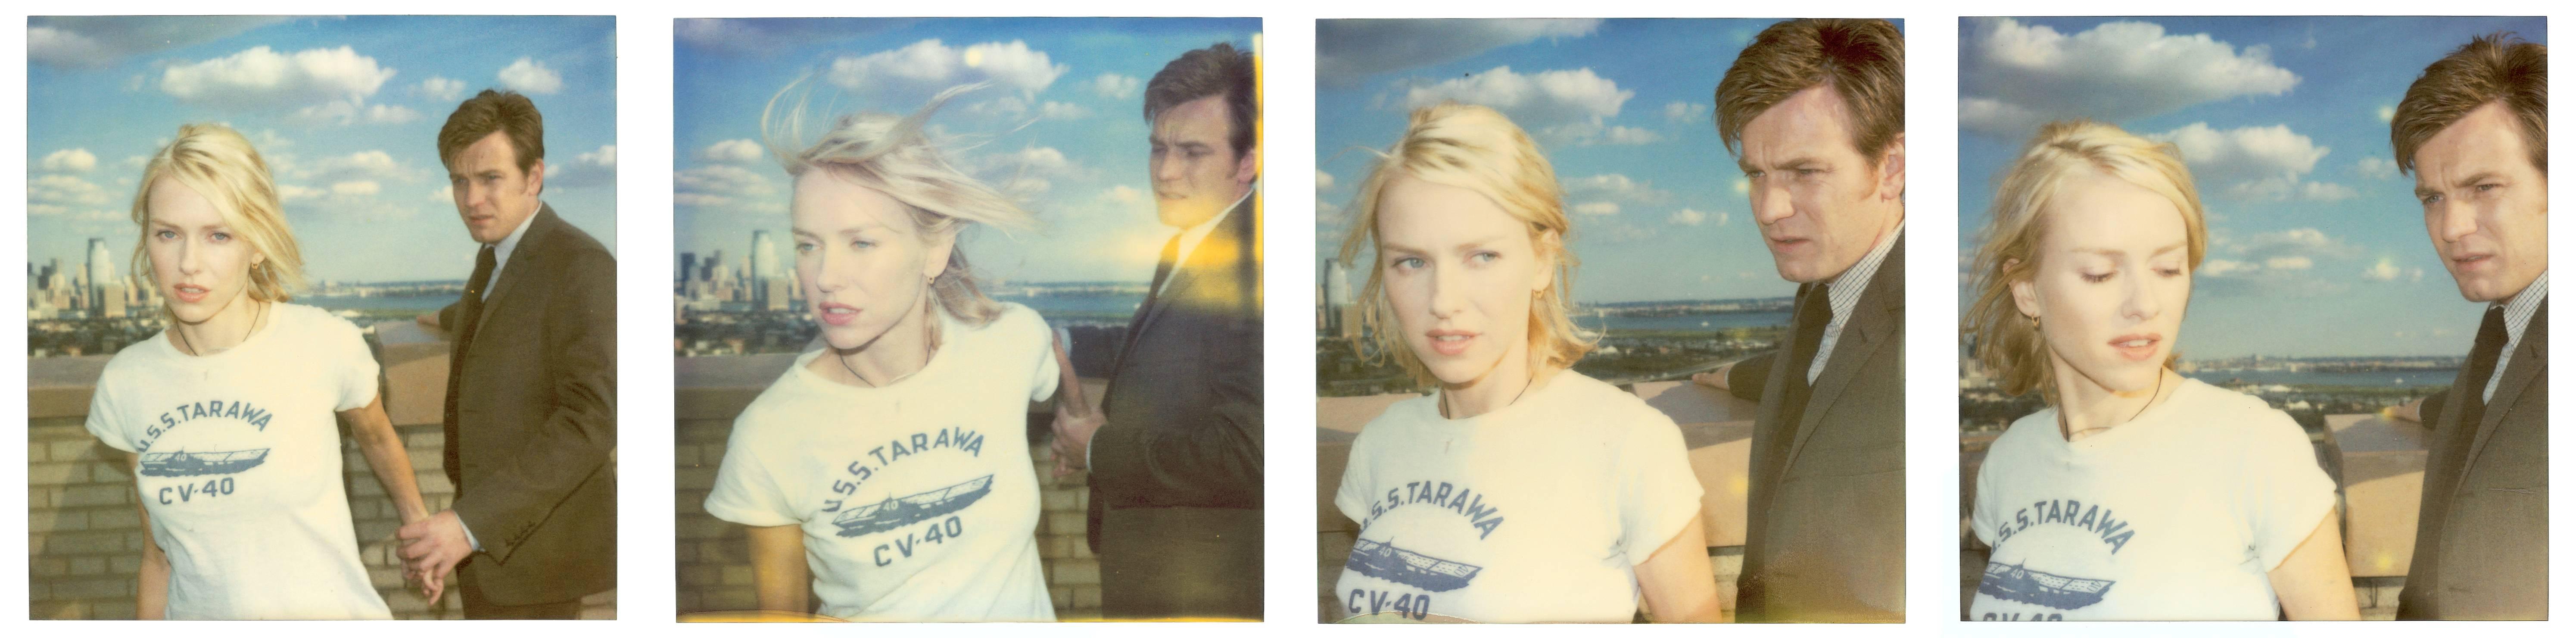 Stefanie Schneider Portrait Photograph - Lila and Sam from the movie Stay with Ewan McGregor, Naomi Watts, mounted